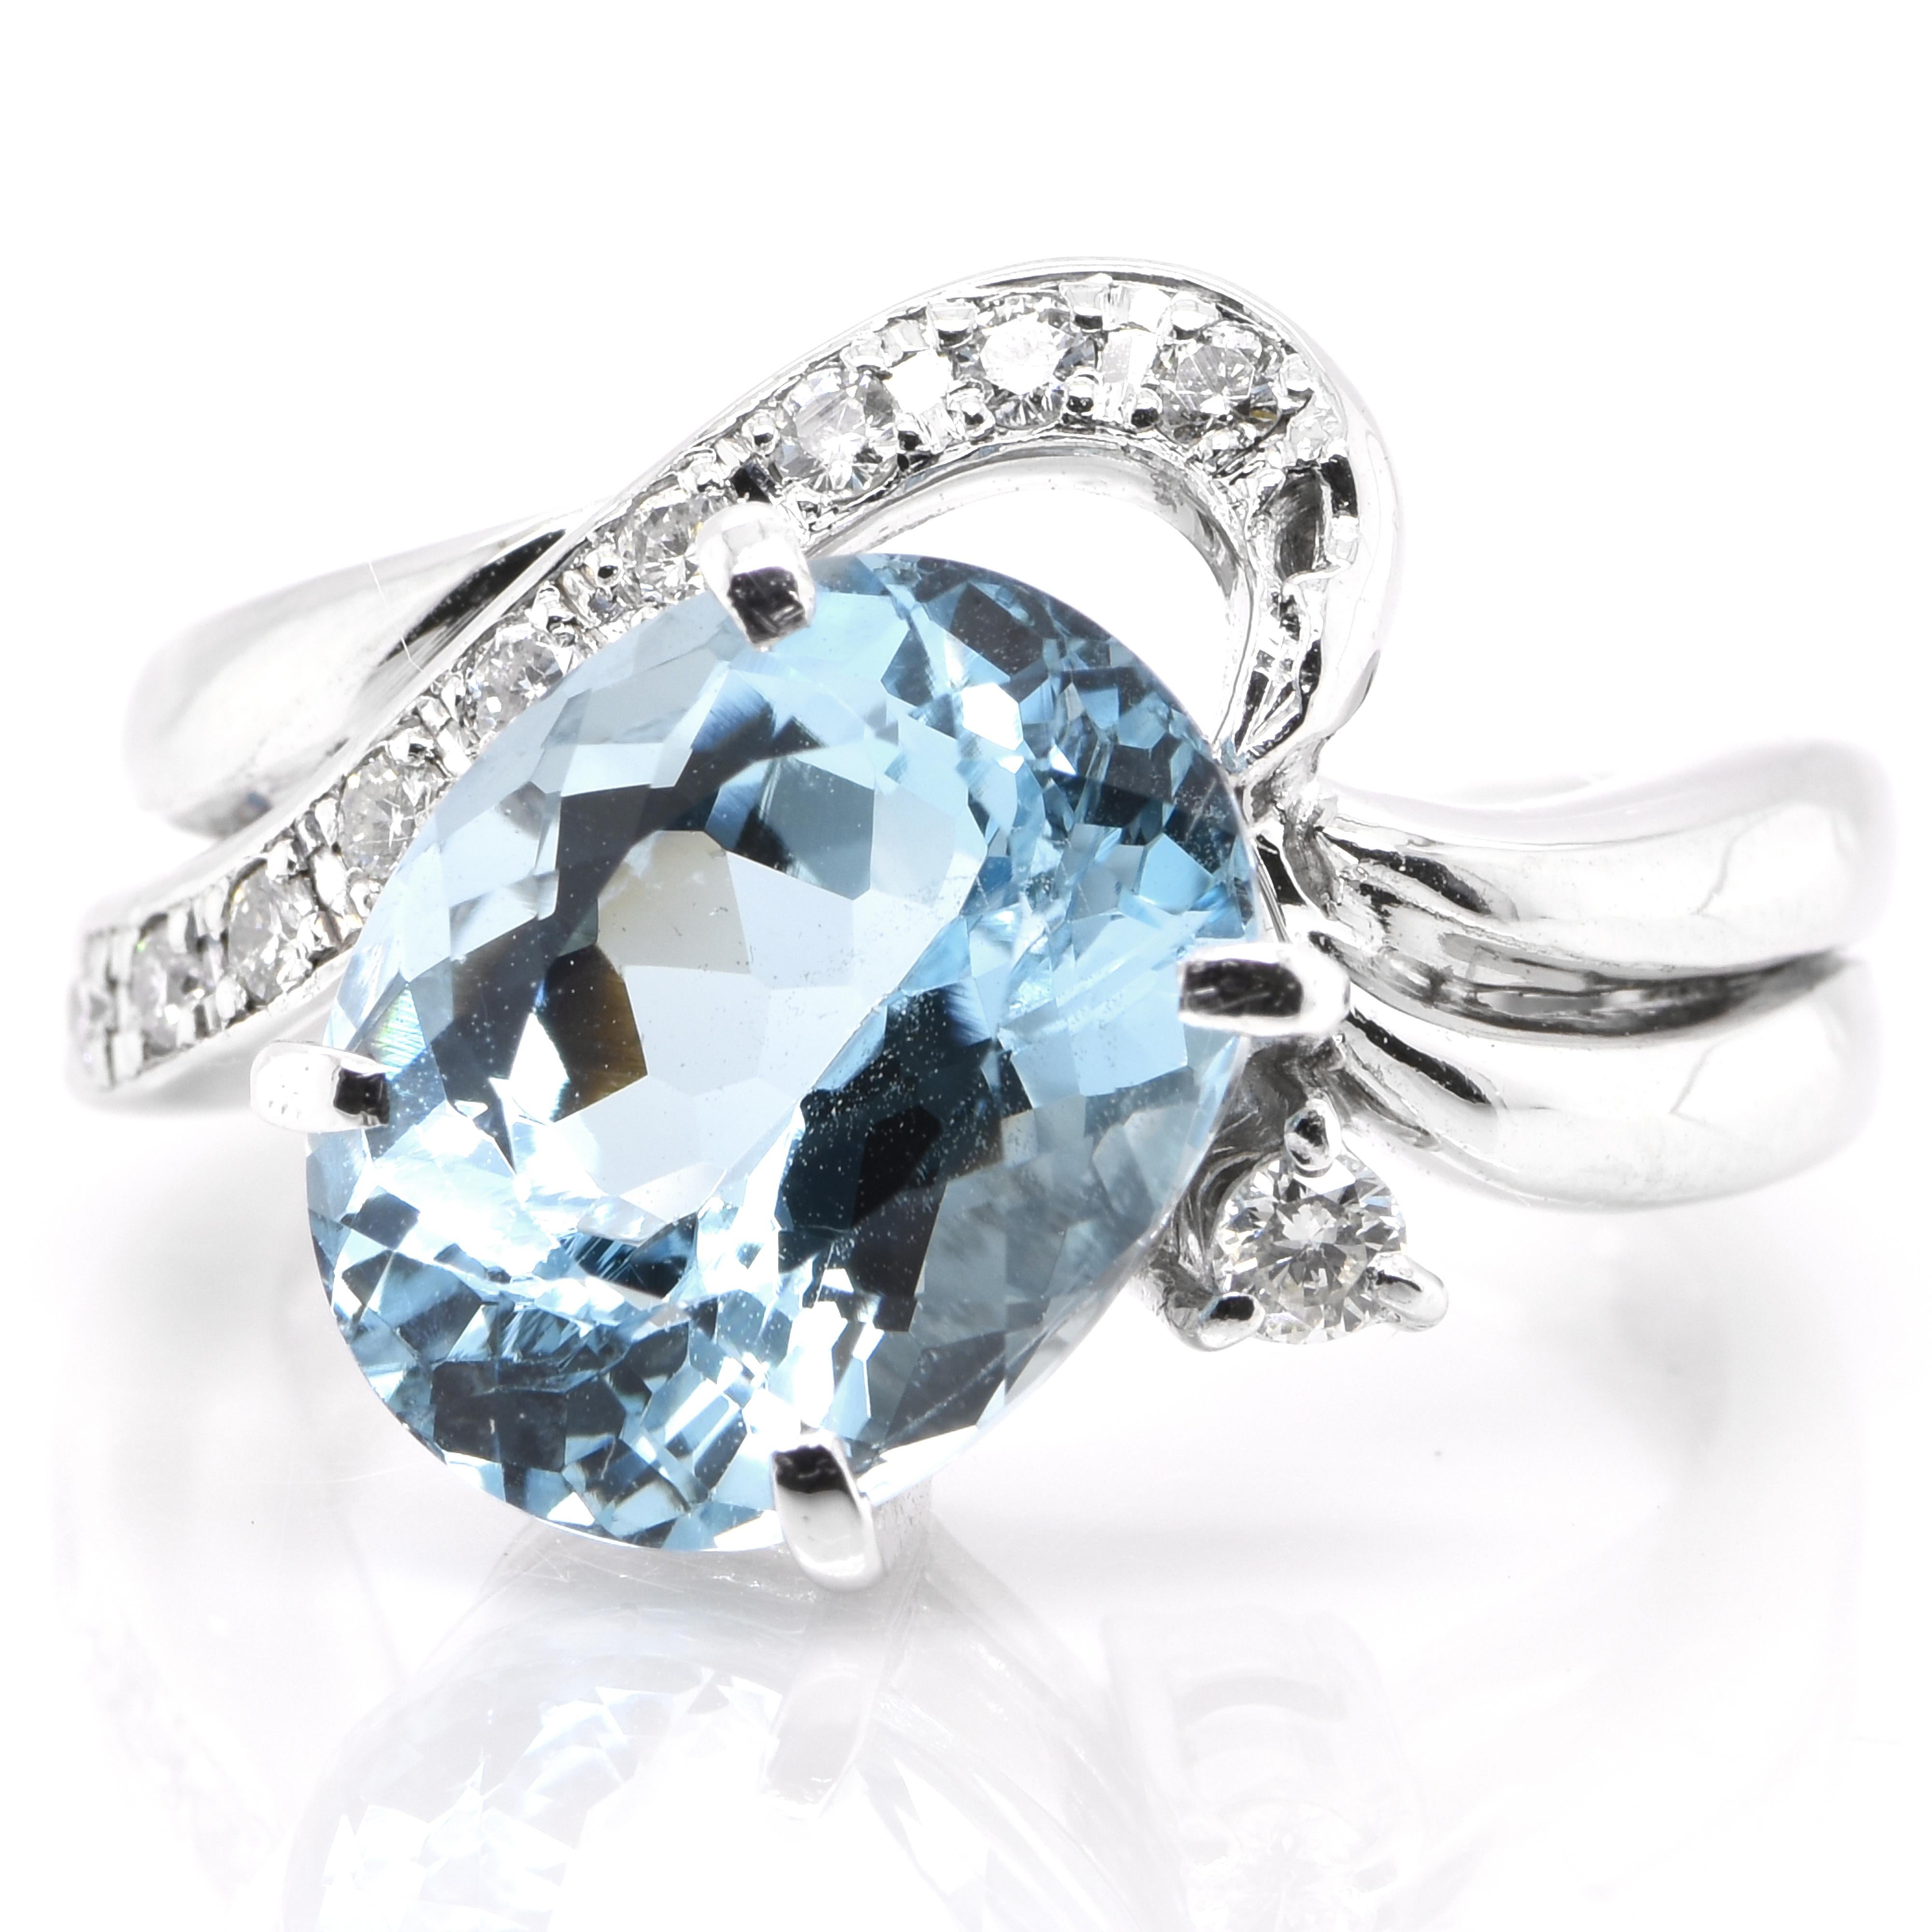 A beautiful Cocktail Ring featuring a 5.03 Carat, Natural Aquamarine and 0.23 Carats of Diamond Accents set in Platinum. Aquamarines have been prized gems throughout human history for their cool blue color. They historically come from the Minas